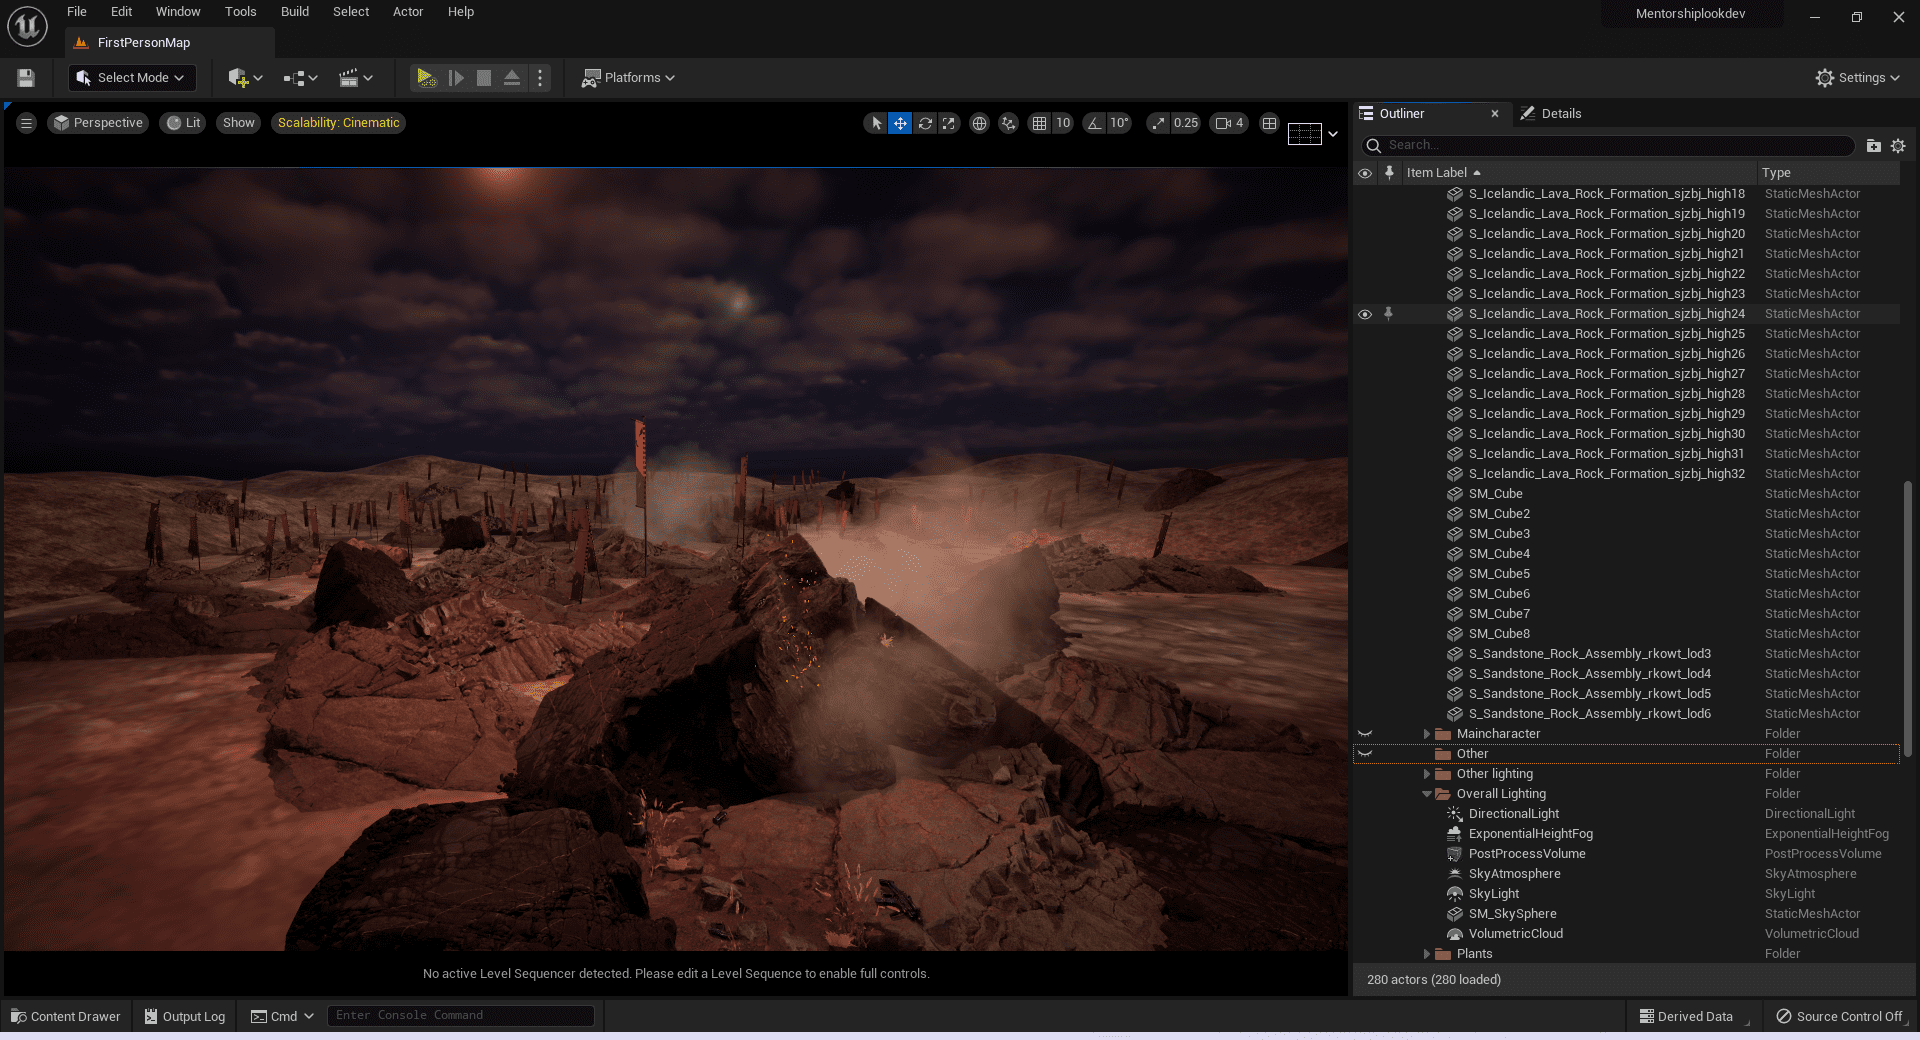 Root Motion in Unreal Engine  Unreal Engine 5.0 Documentation